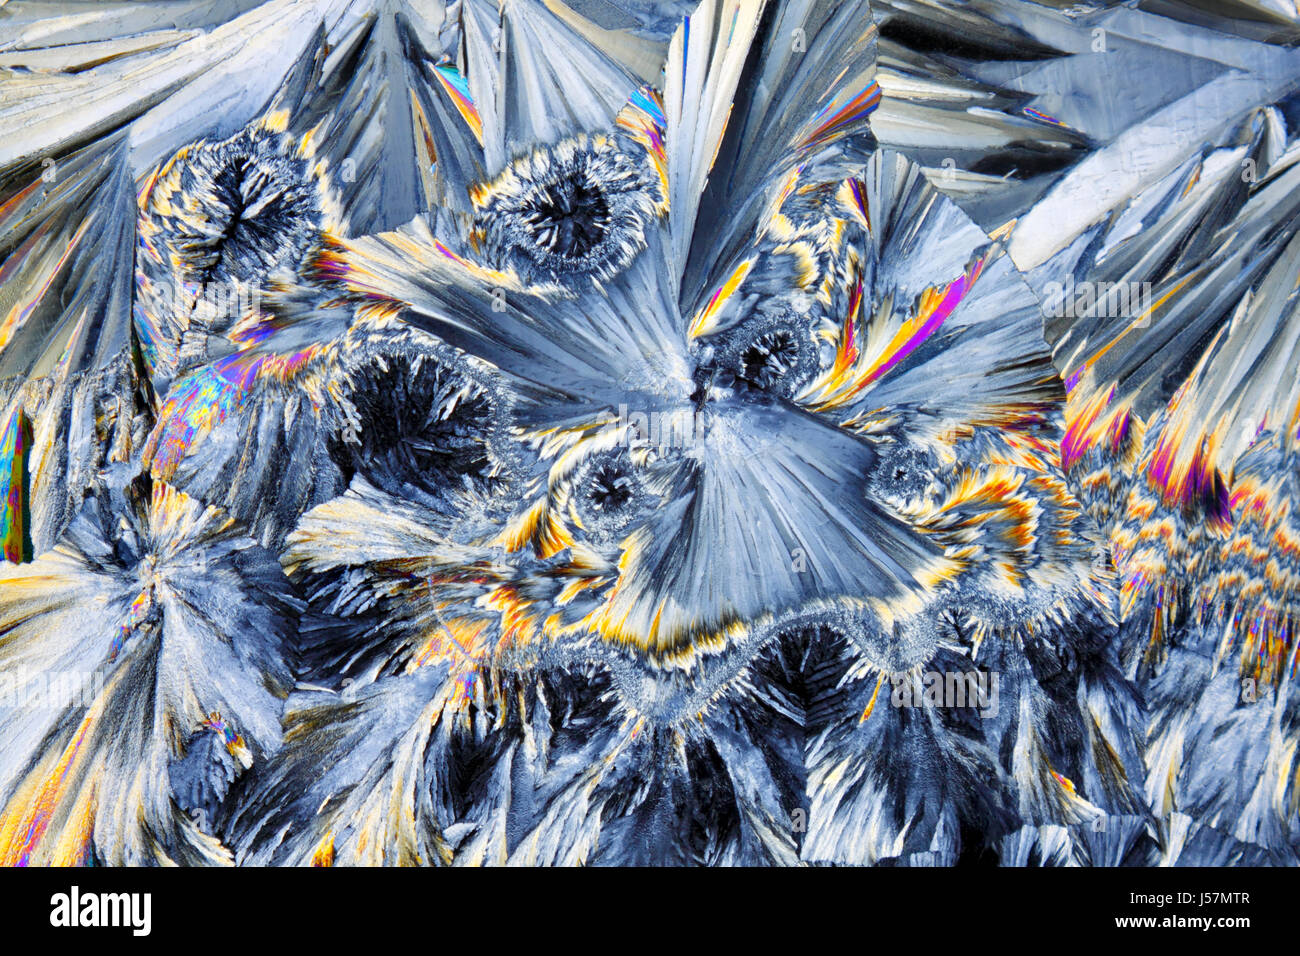 Microscopic view of colorful sucrose crystals. Recrystallized table sugar. Polarized light, crossed polarizers. Stock Photo